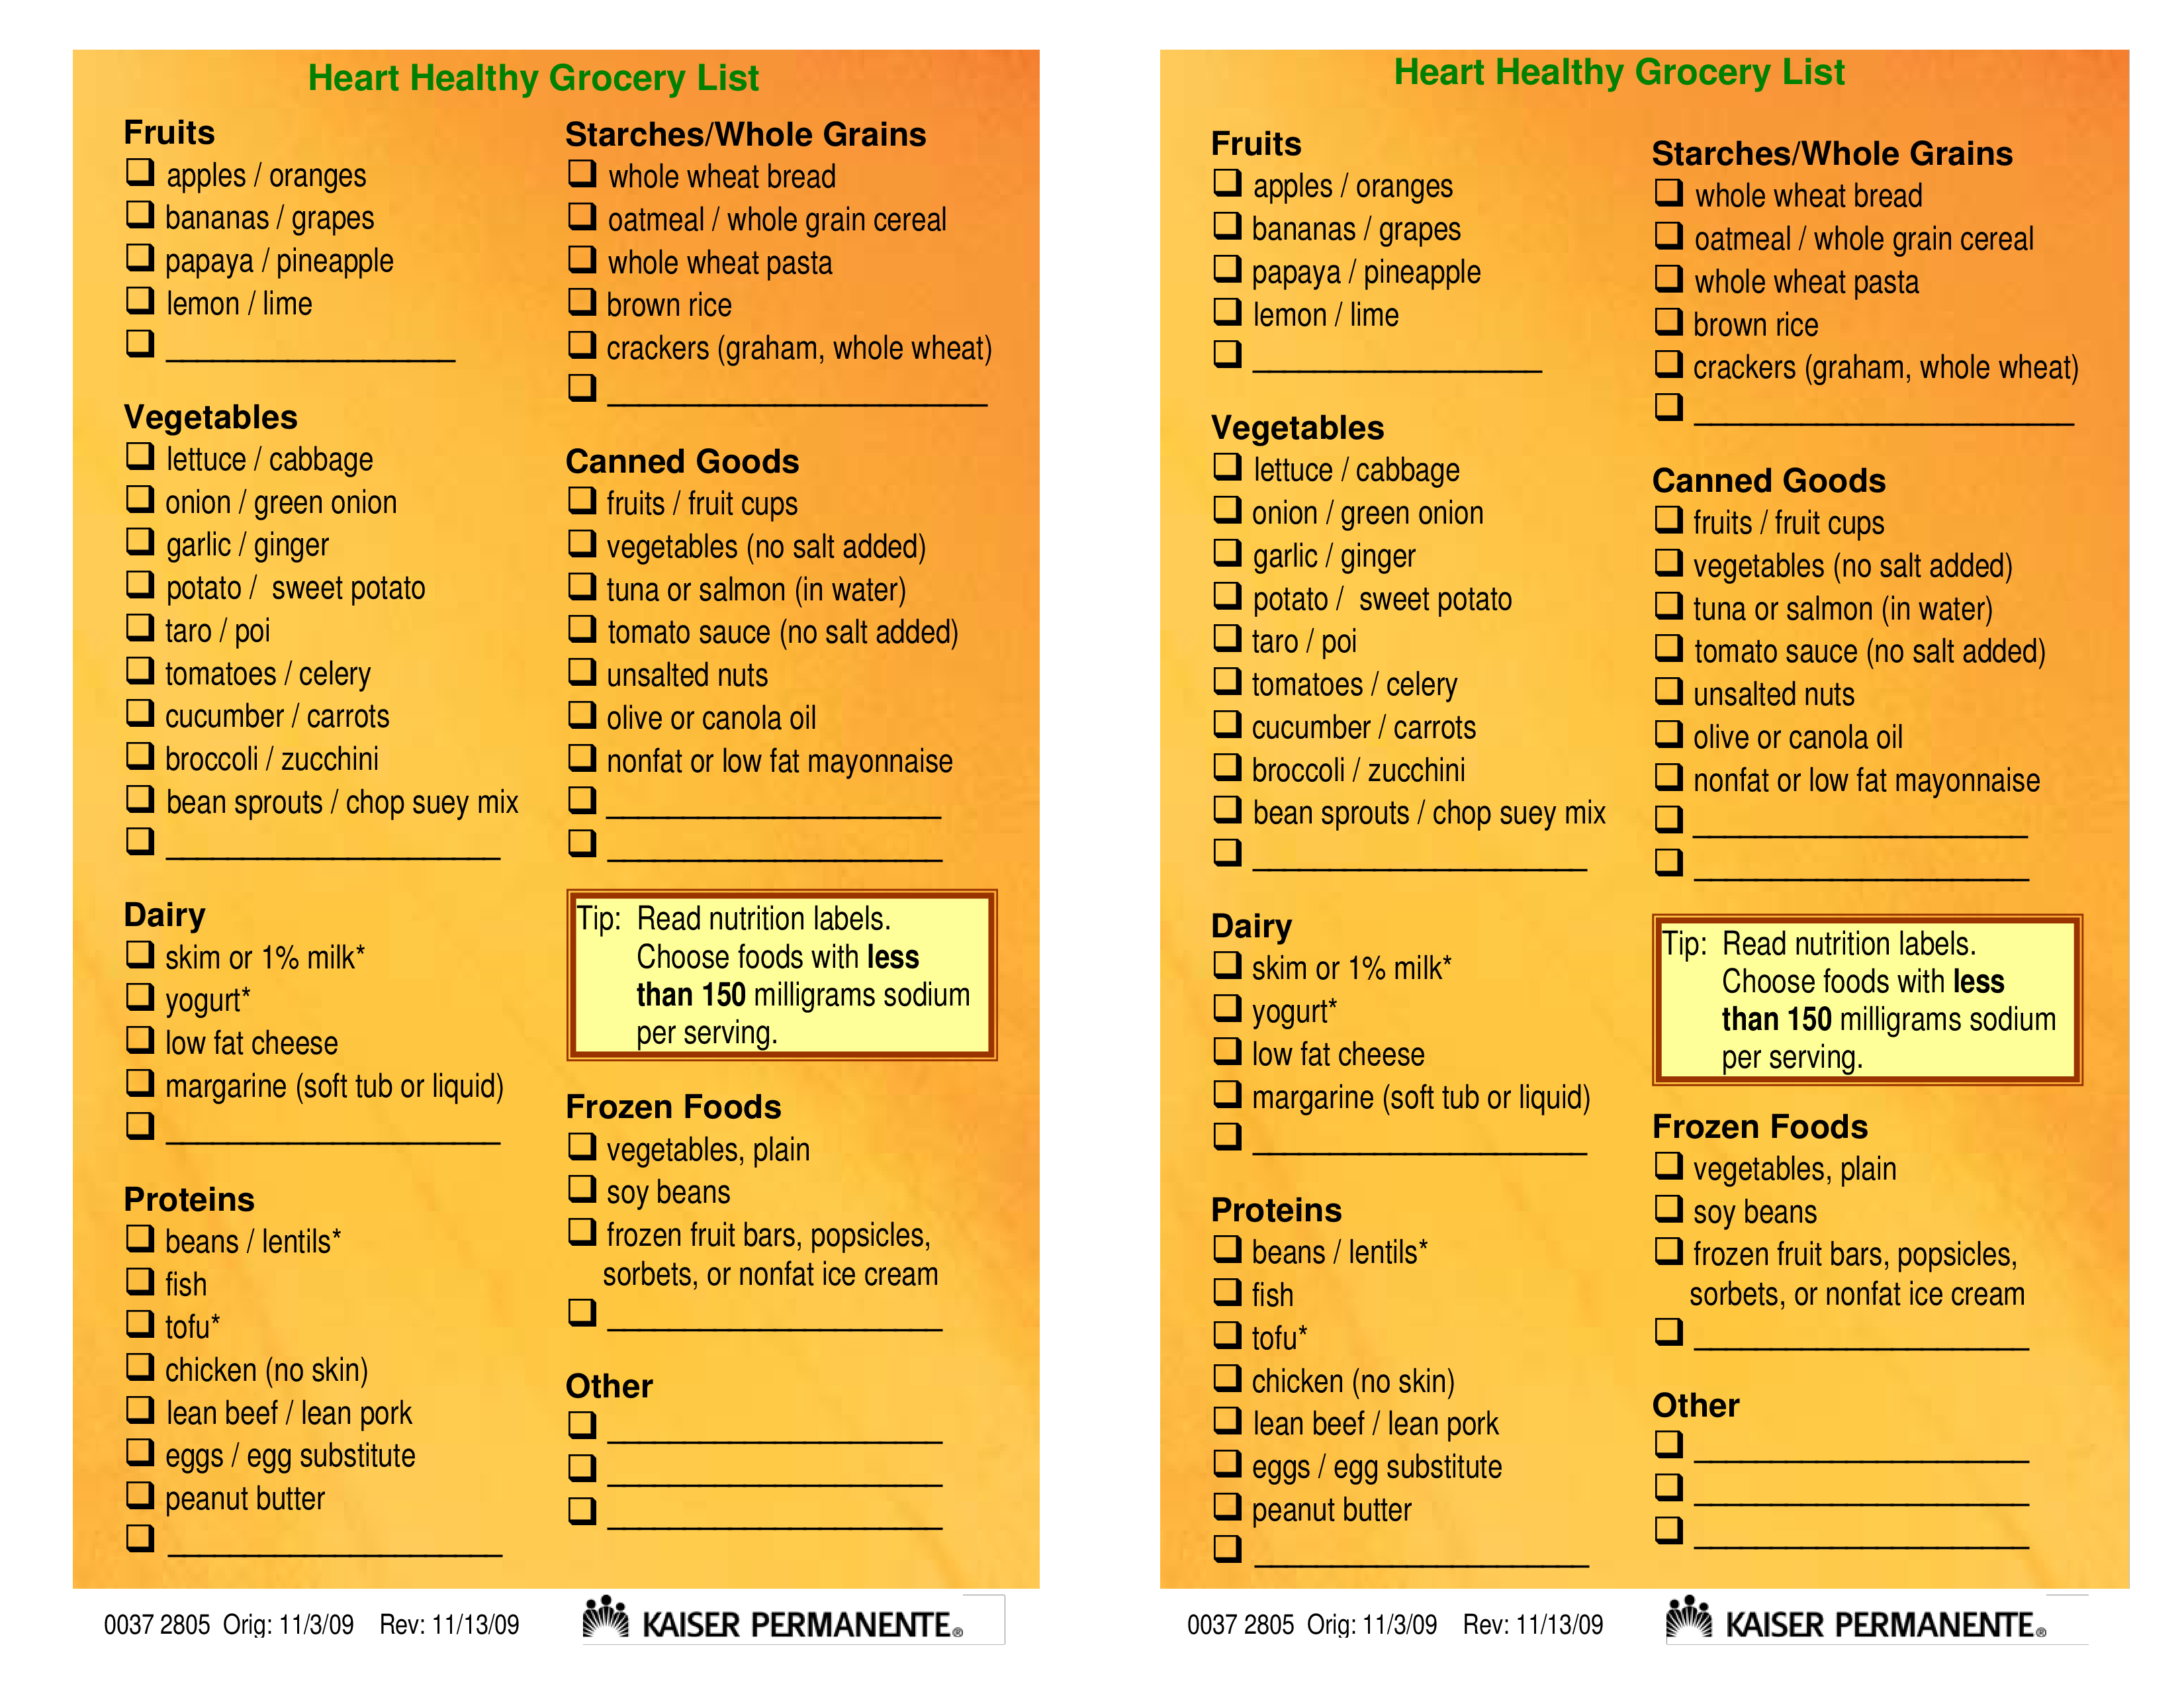 printable heart healthy grocery list templates at